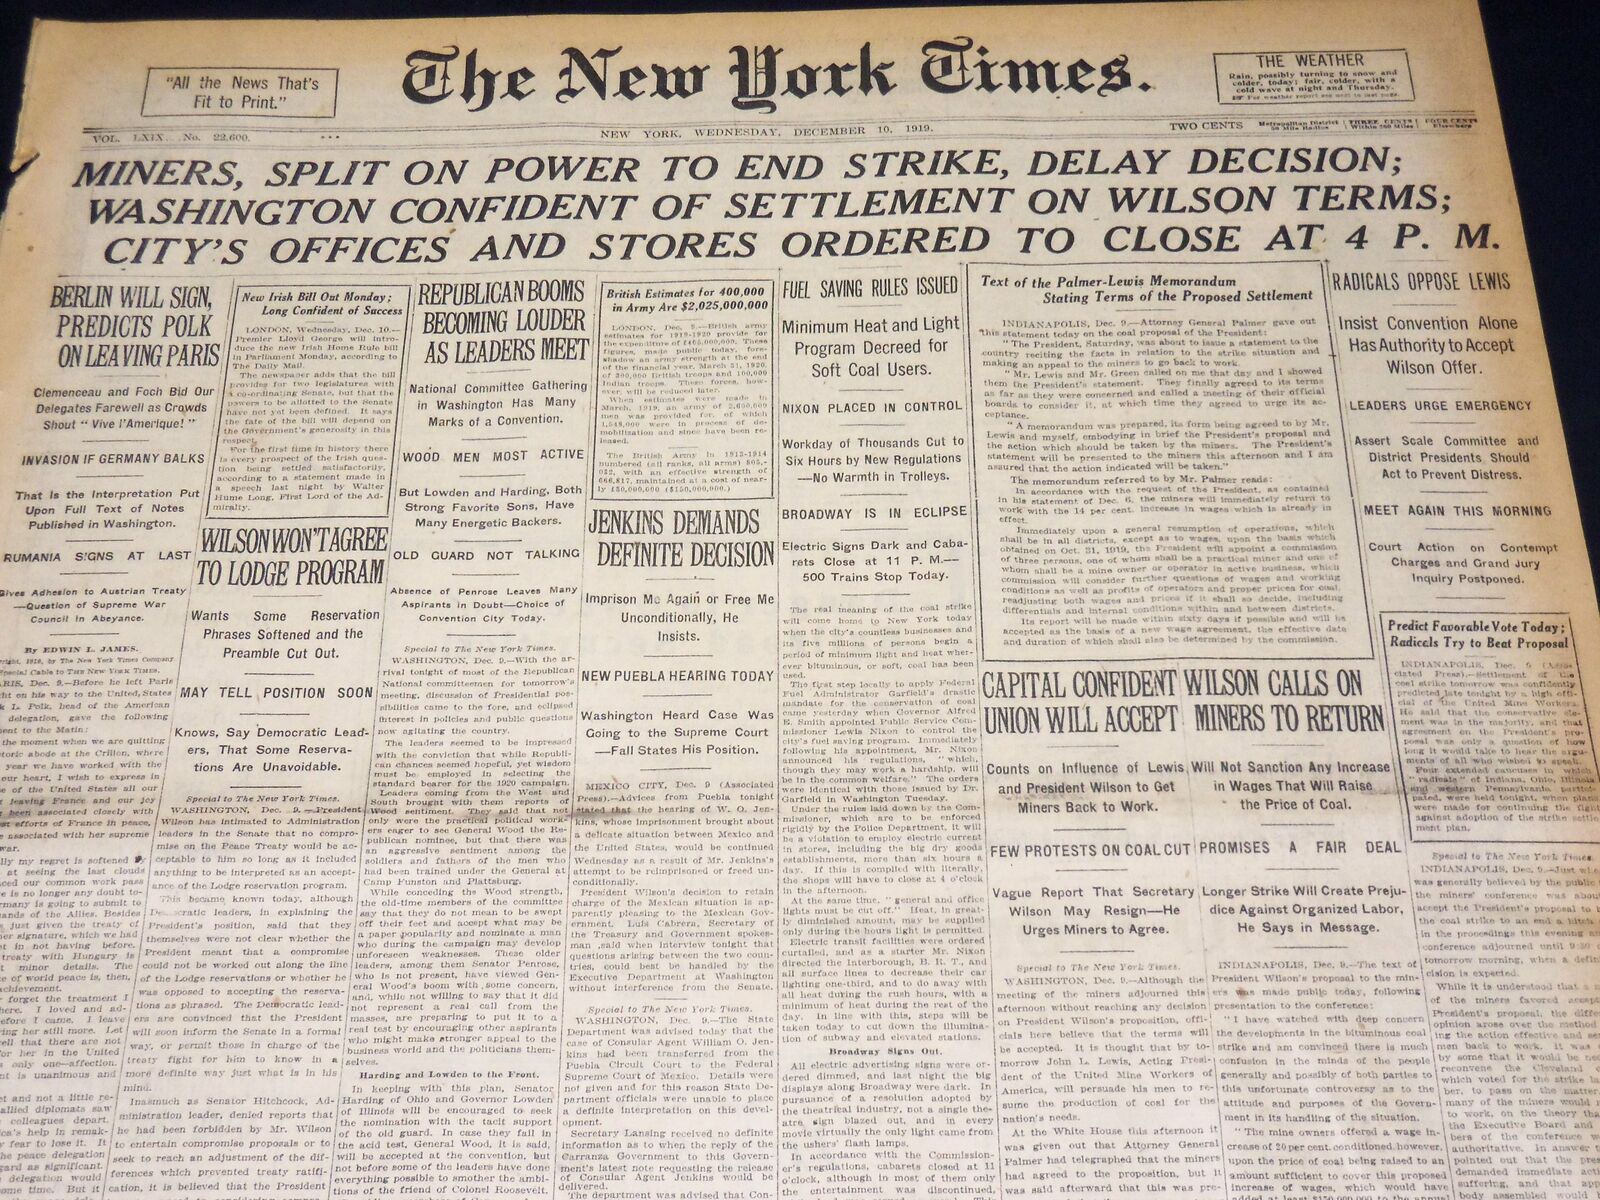 1919 DECEMBER 10 NEW YORK TIMES - MINERS DELAY DECISION TO END STRIKE - NT 7951